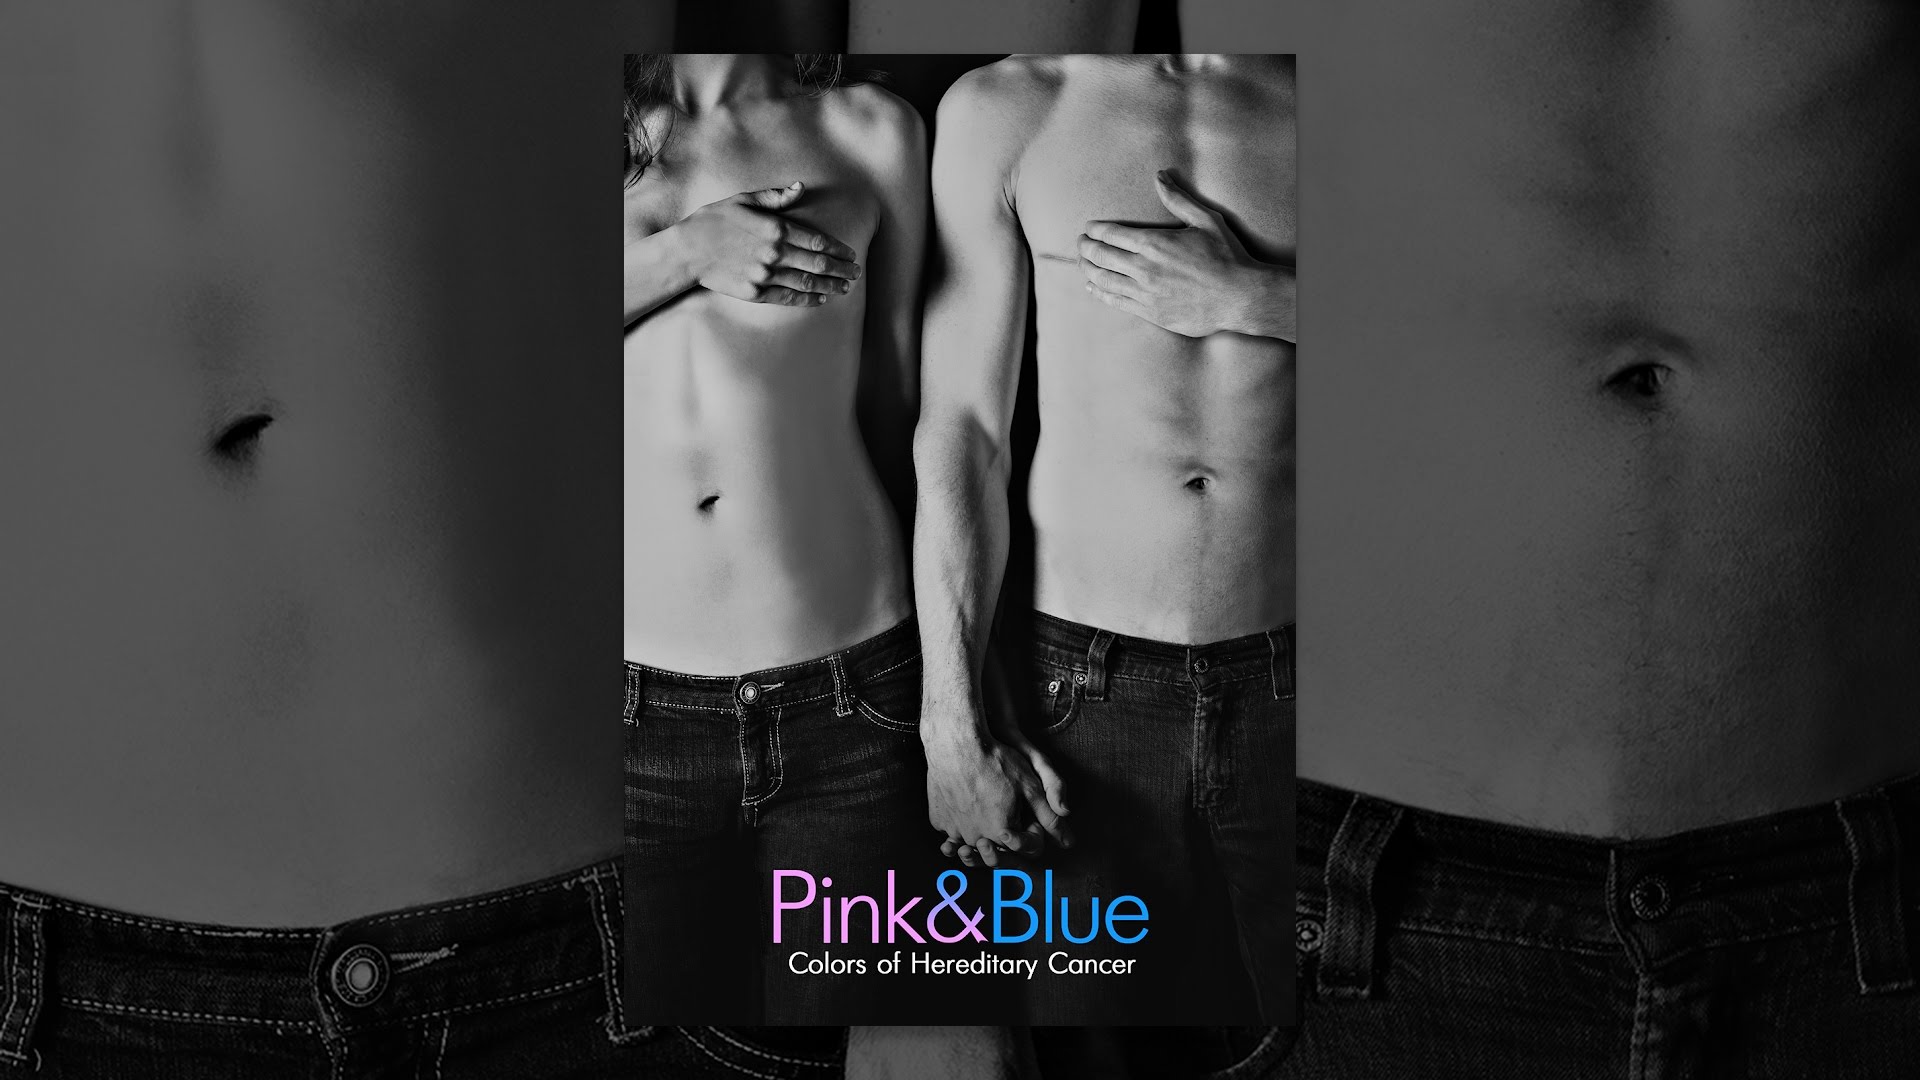 Pink & Blue: Colors of Hereditary Cancer